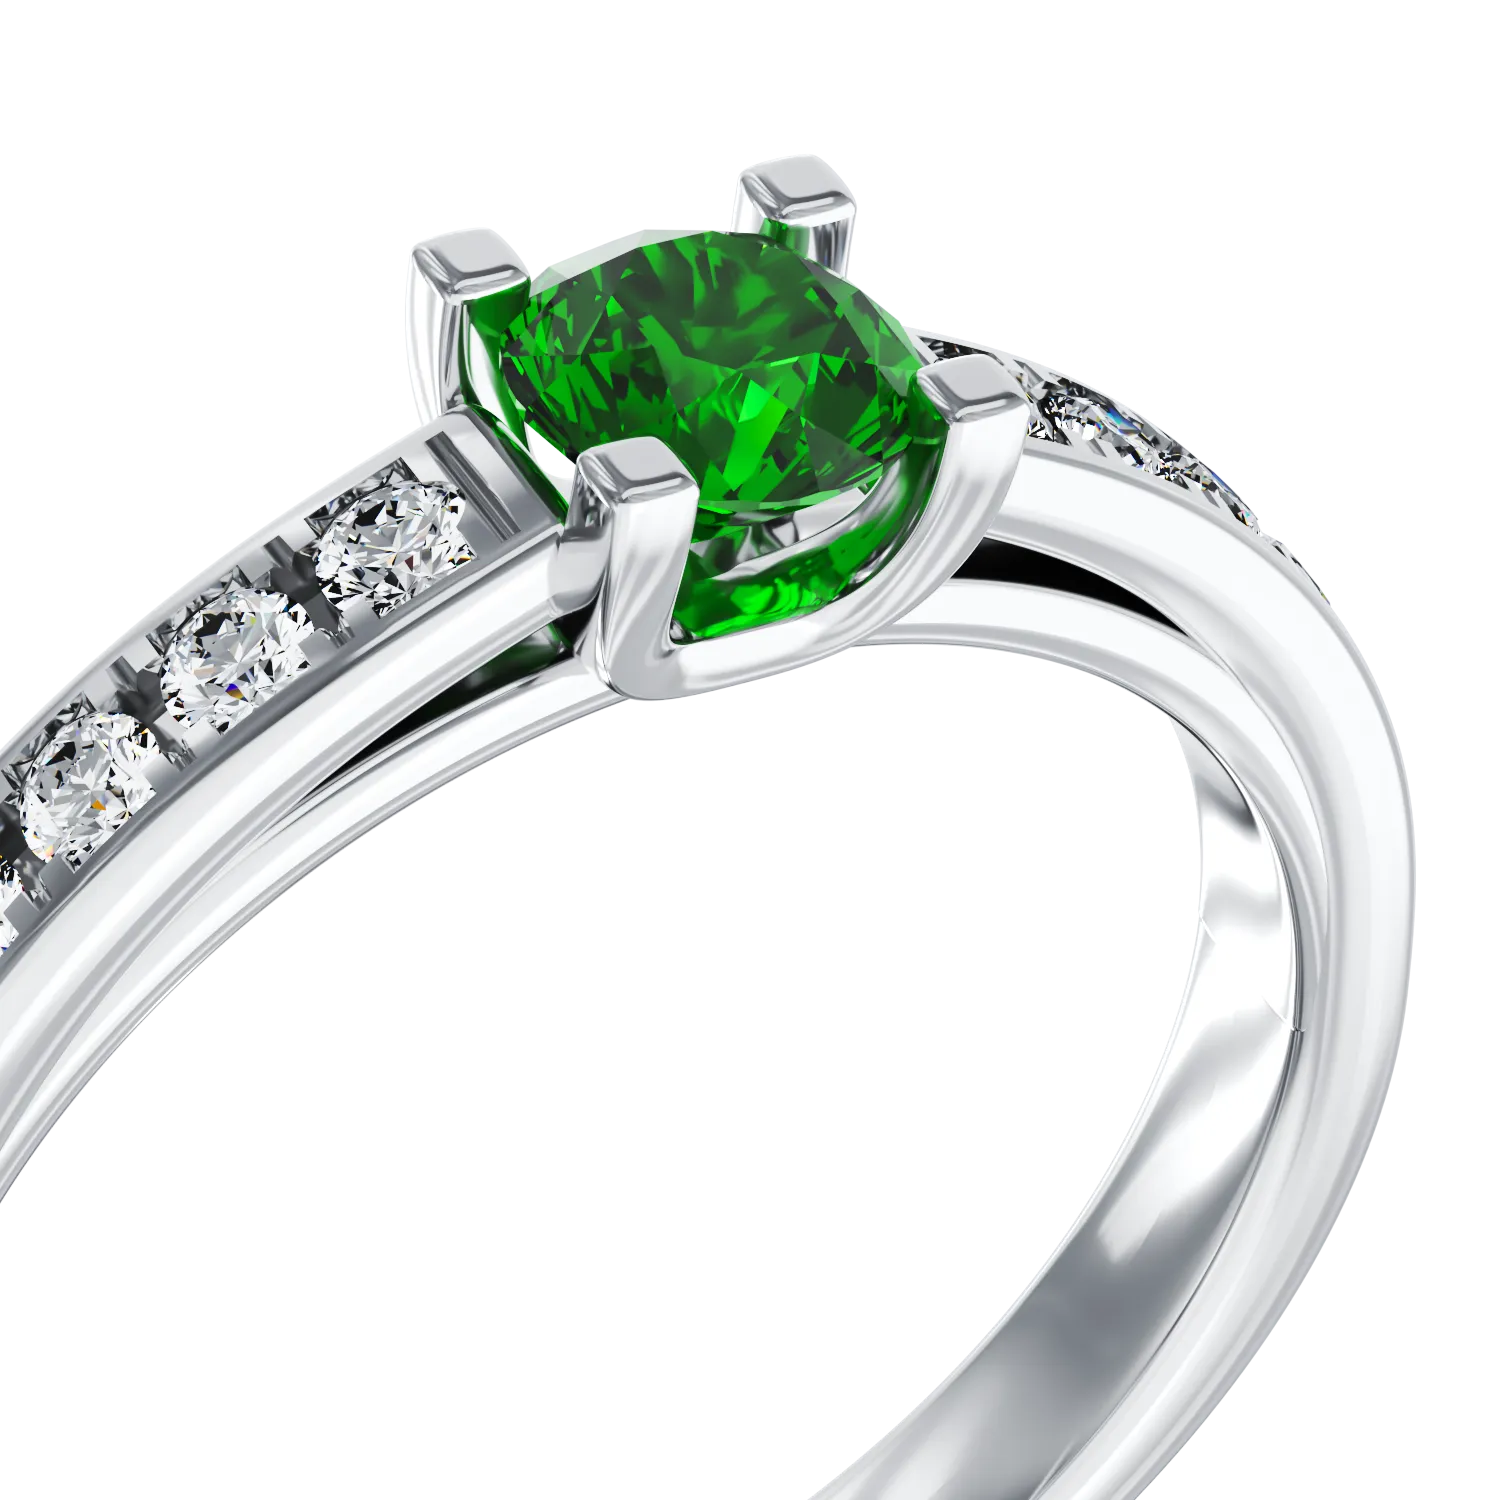 18K white gold engagement ring with 0.25ct emerald and 0.15ct diamonds